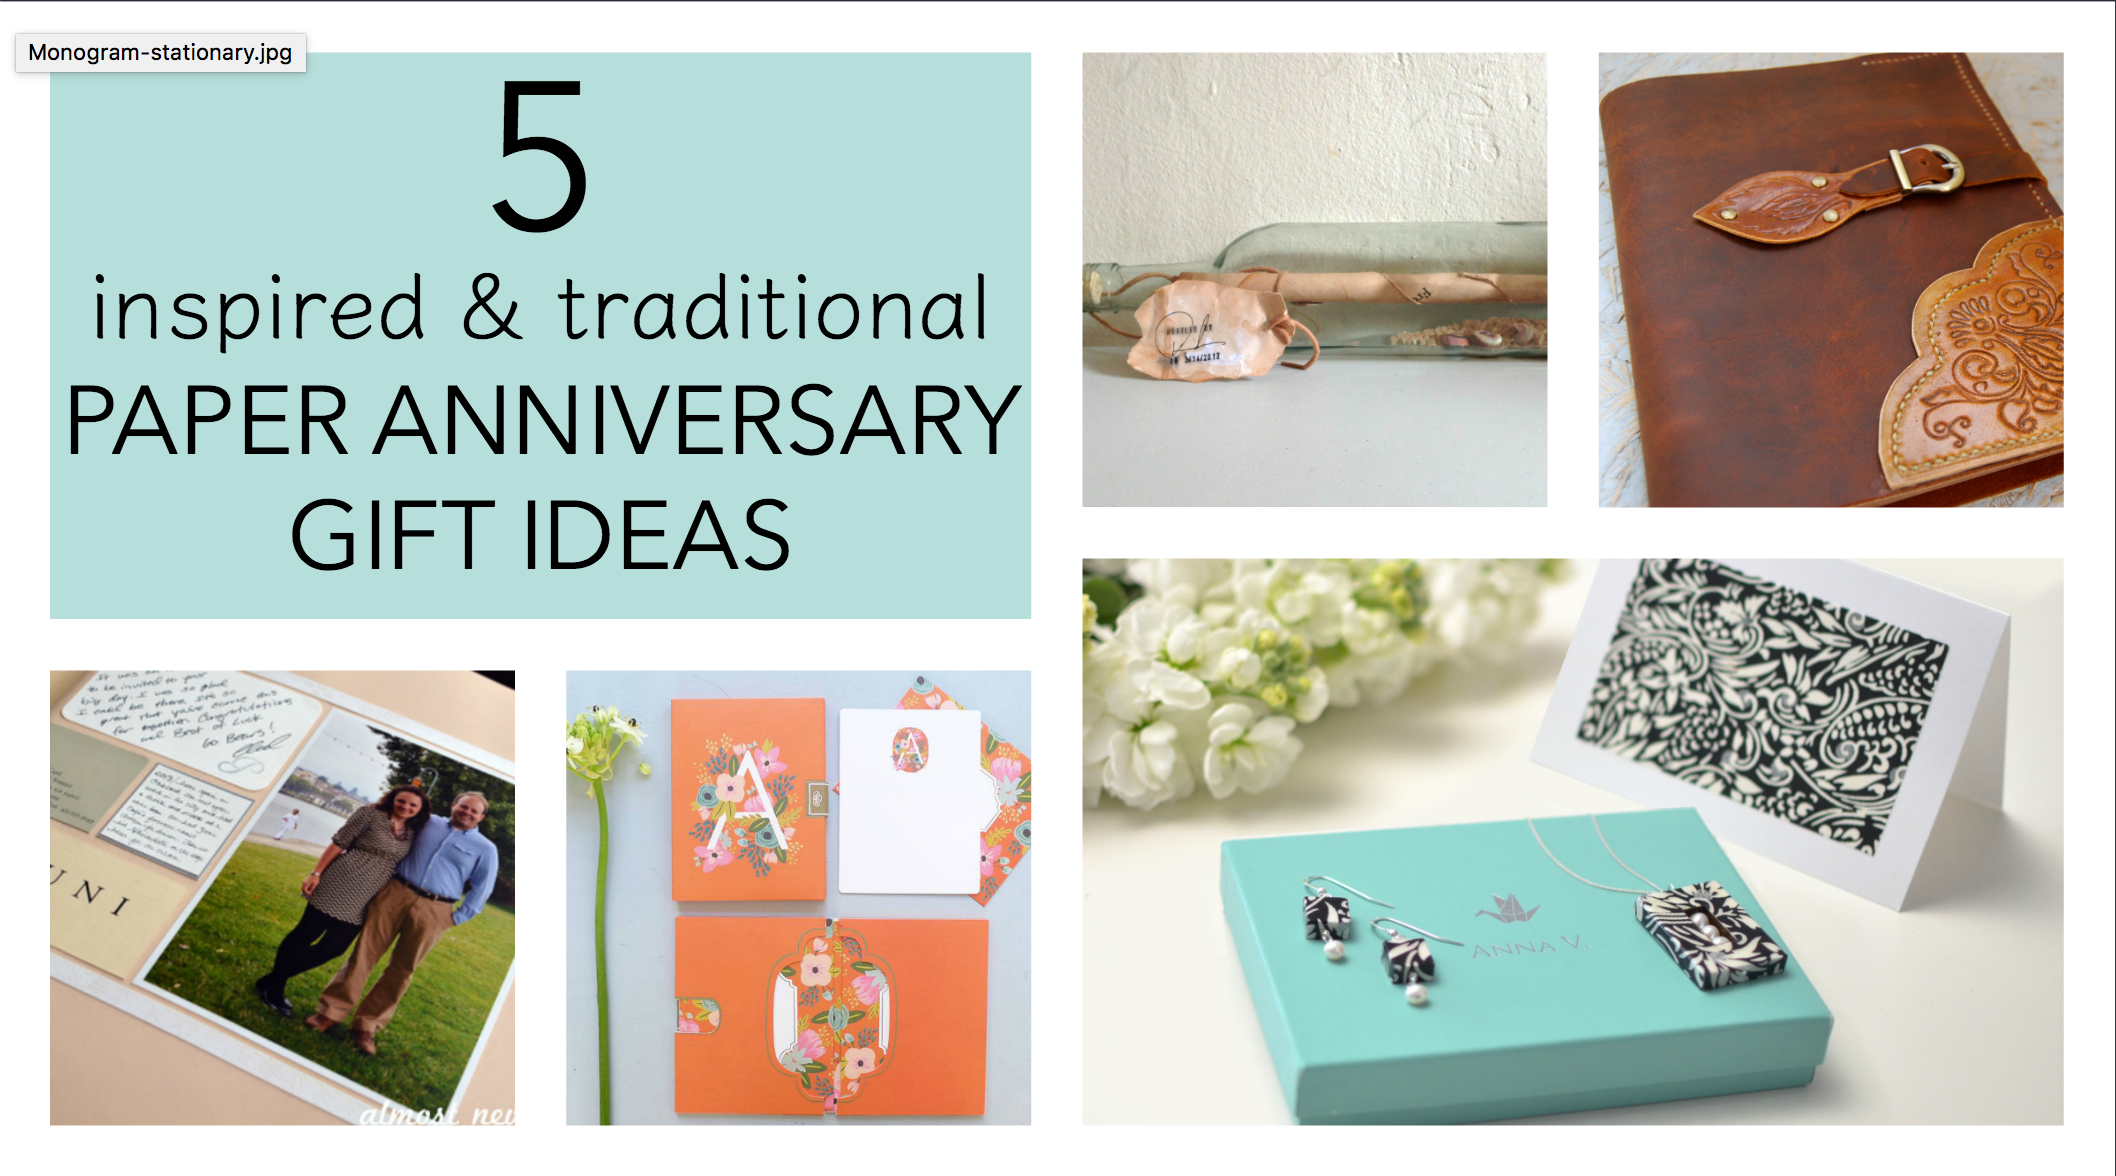 Gift ideas for 1st anniversary Newtownabbey